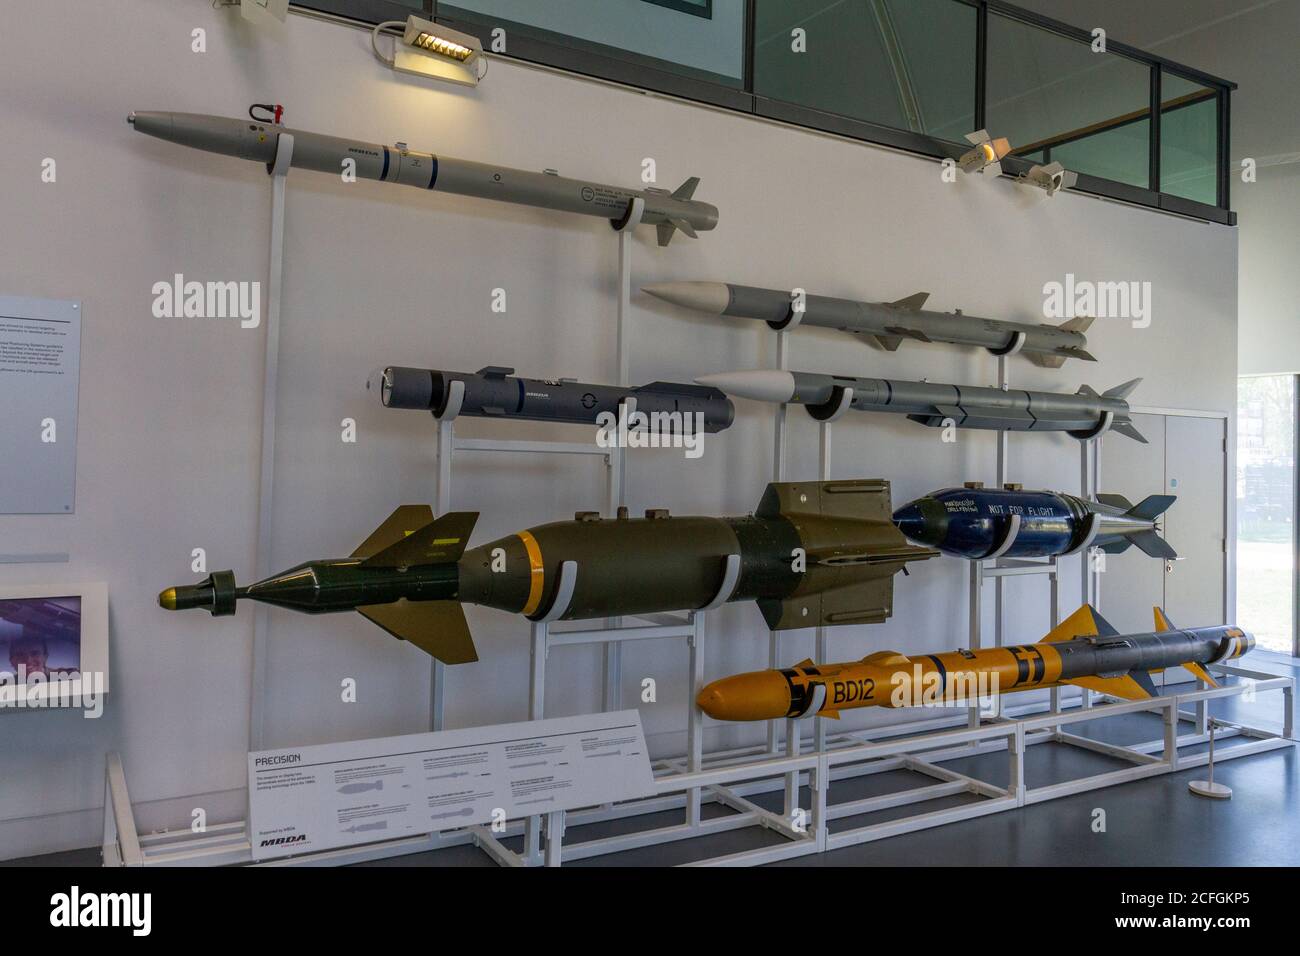 A display showing aerial bomb and missile development in the RAF Museum, London, UK. Stock Photo